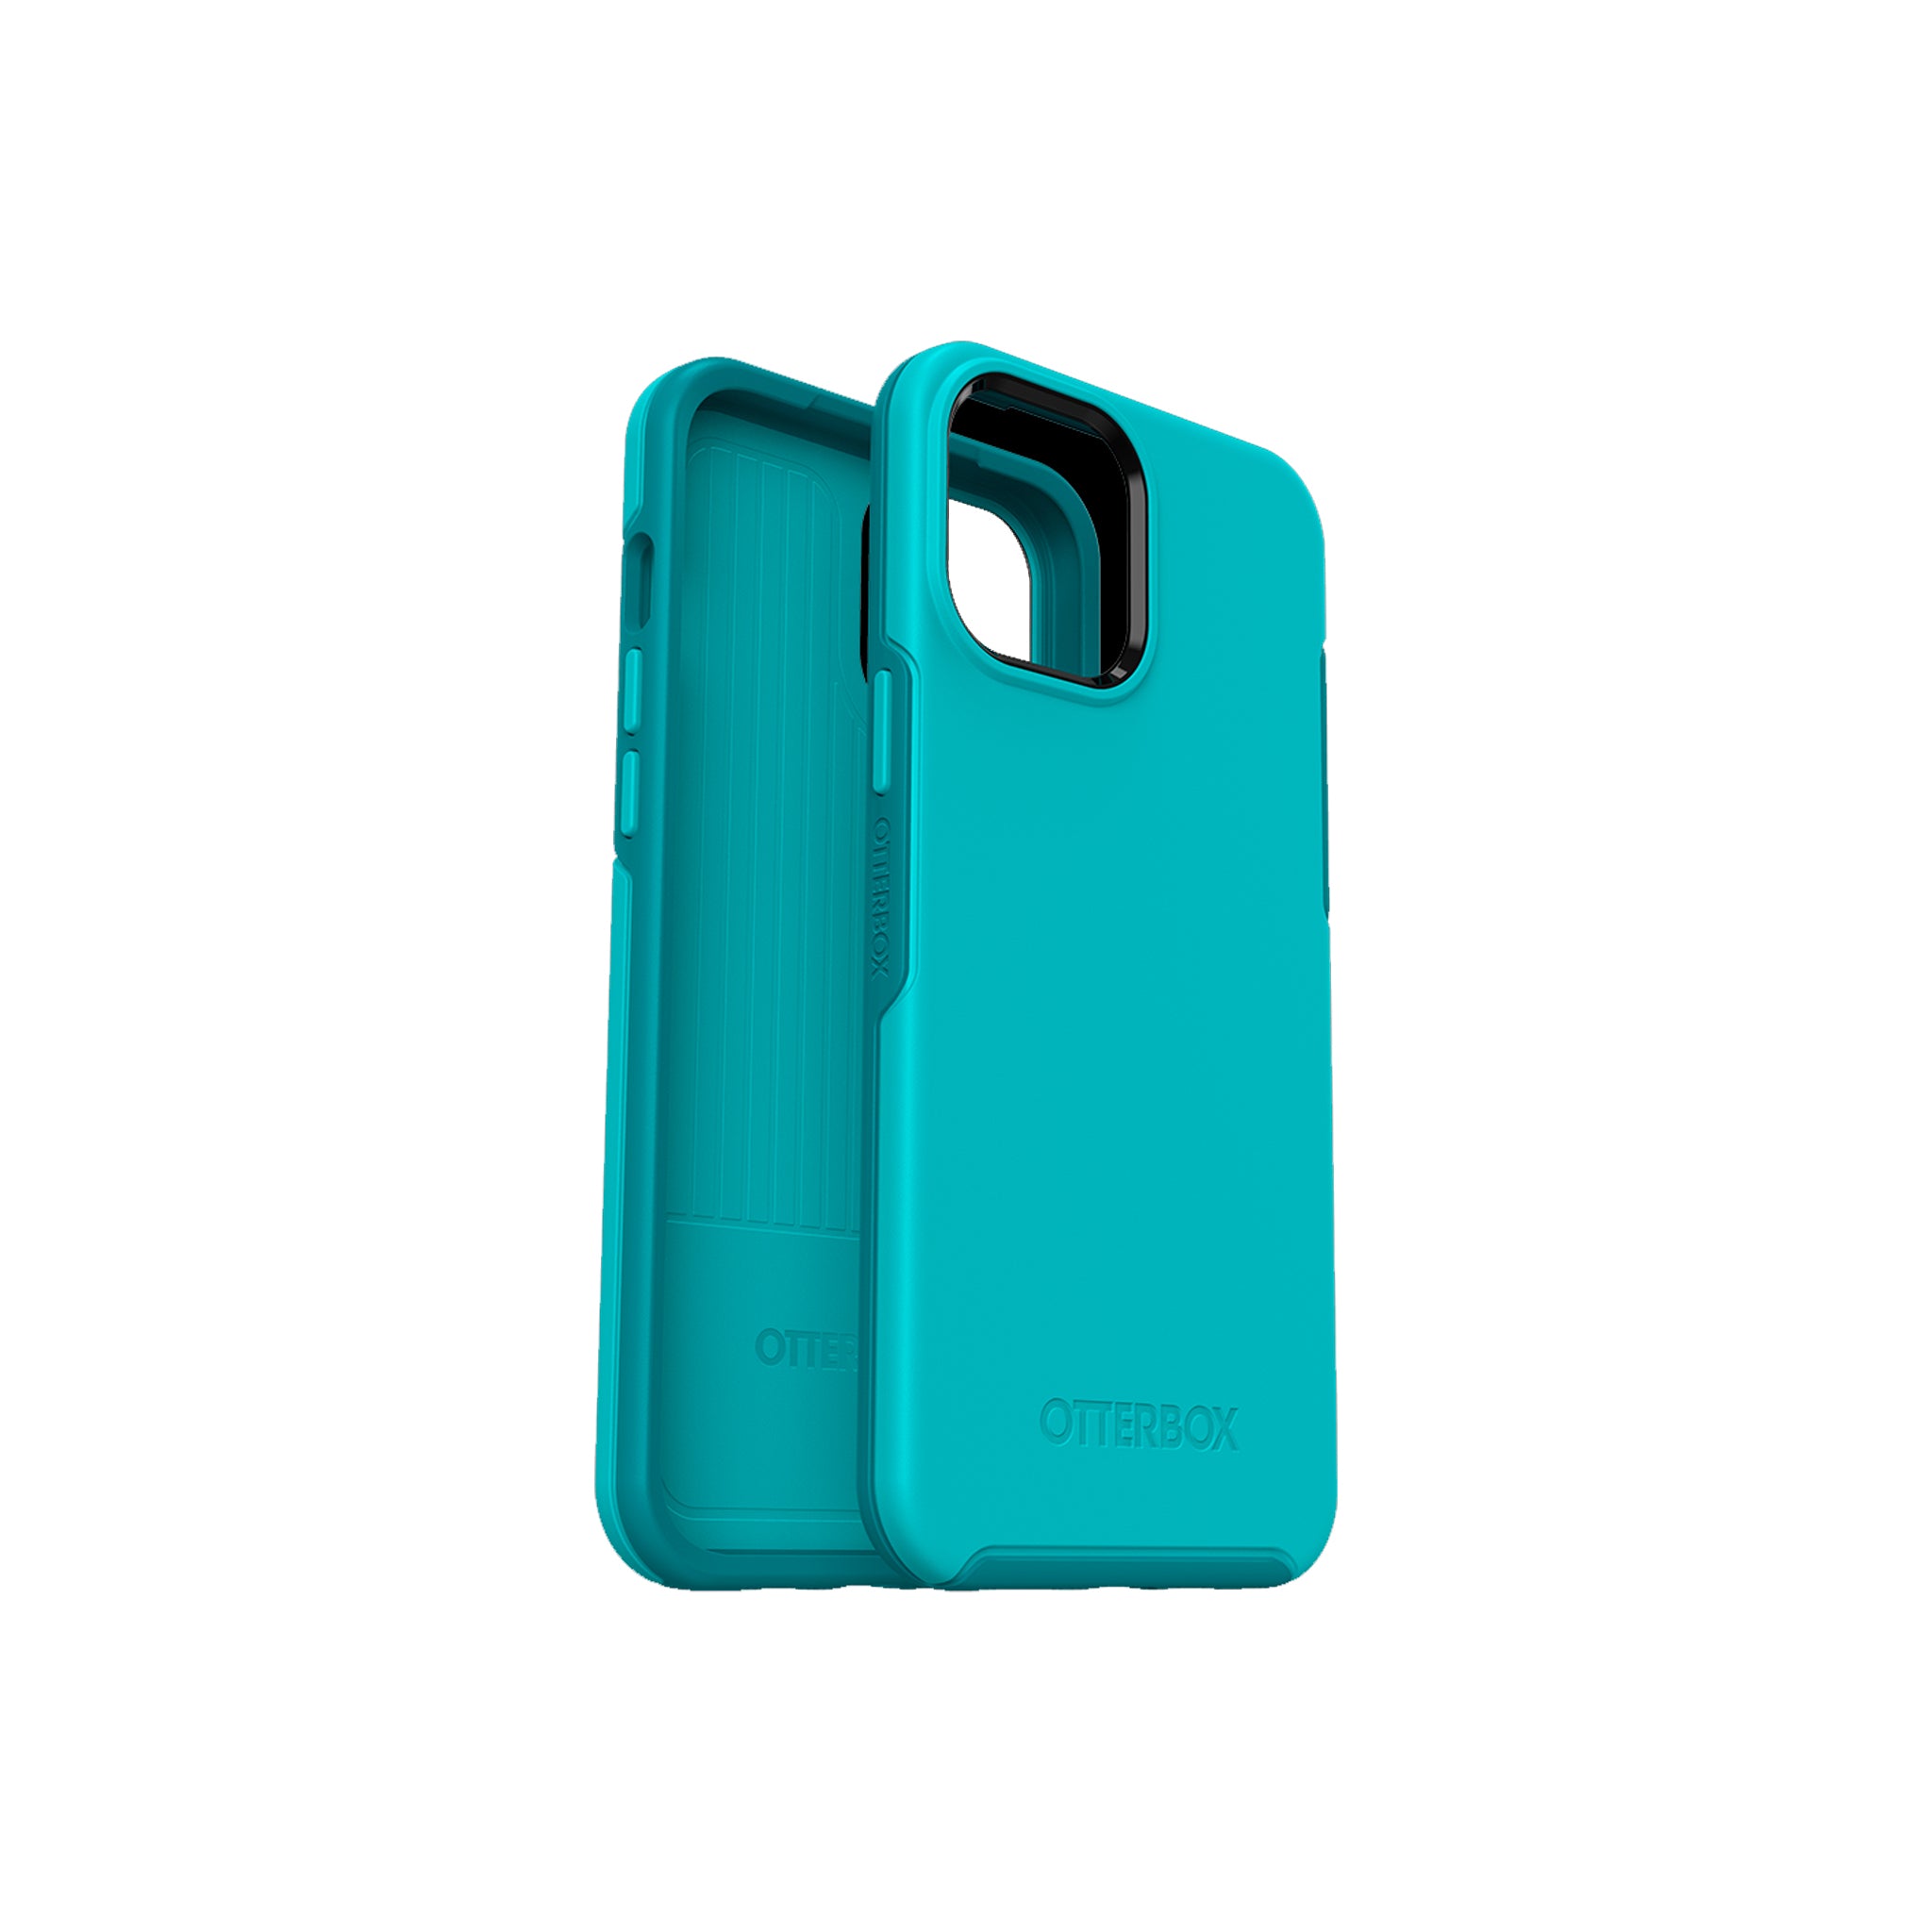 OtterBox - Symmetry for iPhone 12 Pro Max - Rock Candy